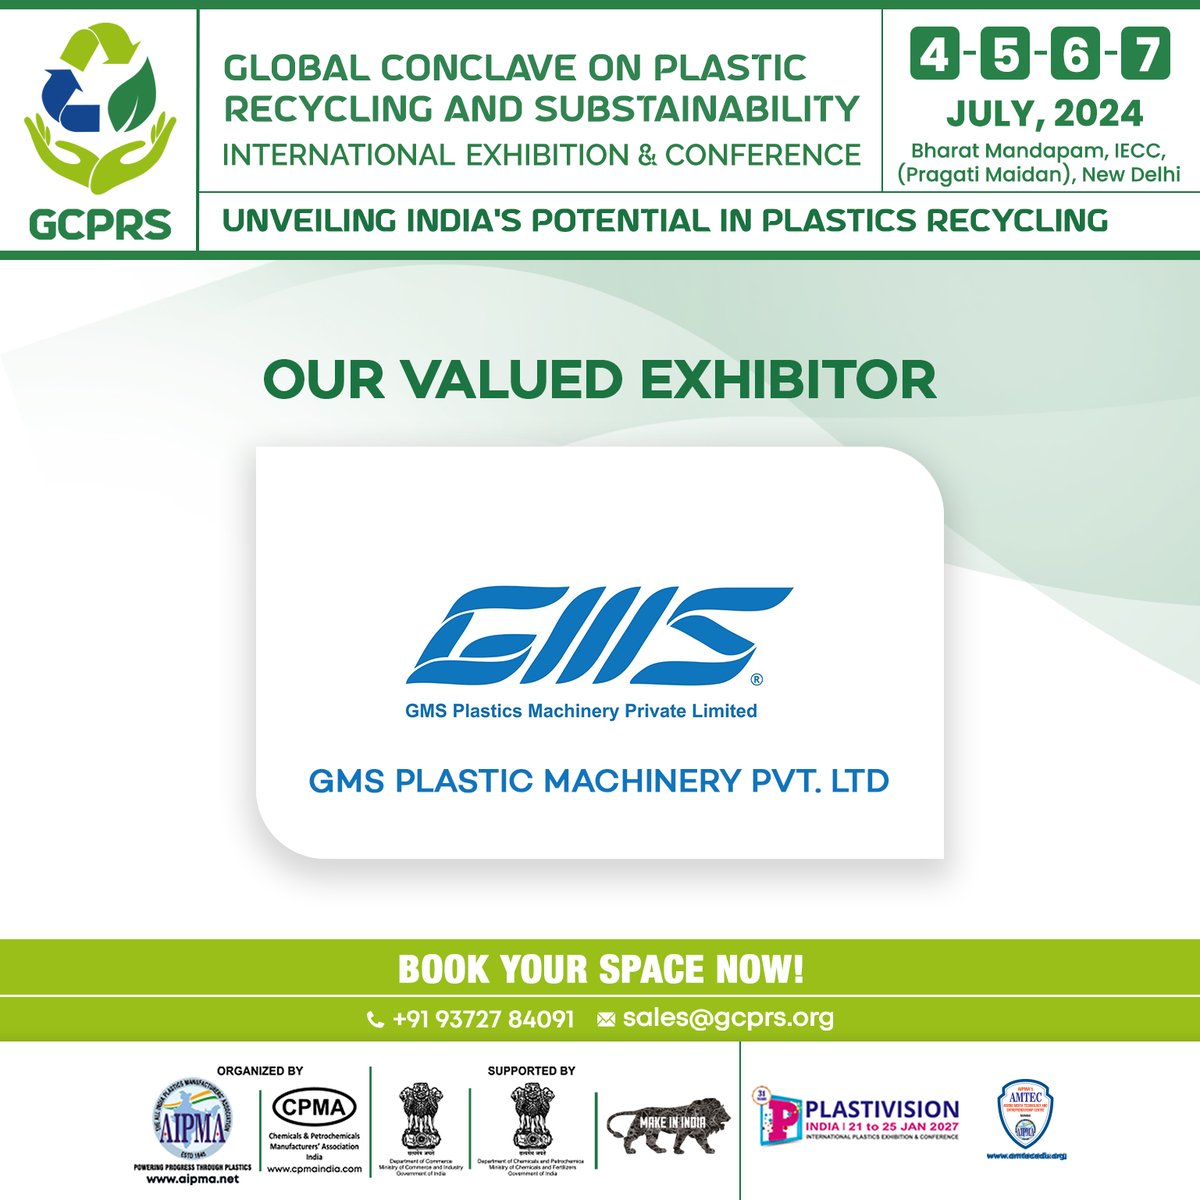 Join us as our esteemed exhibitor! Book Your Space Now!

Save the Dates: 4th - 5th- 6th - 7th July, 2024

Venue: Bharat Mandapam, New Delhi

To participate visit: bit.ly/3v8IOB2

#GCPRS #Sustainability #GreenInitiative #Renewal #plastics #plasticindustry